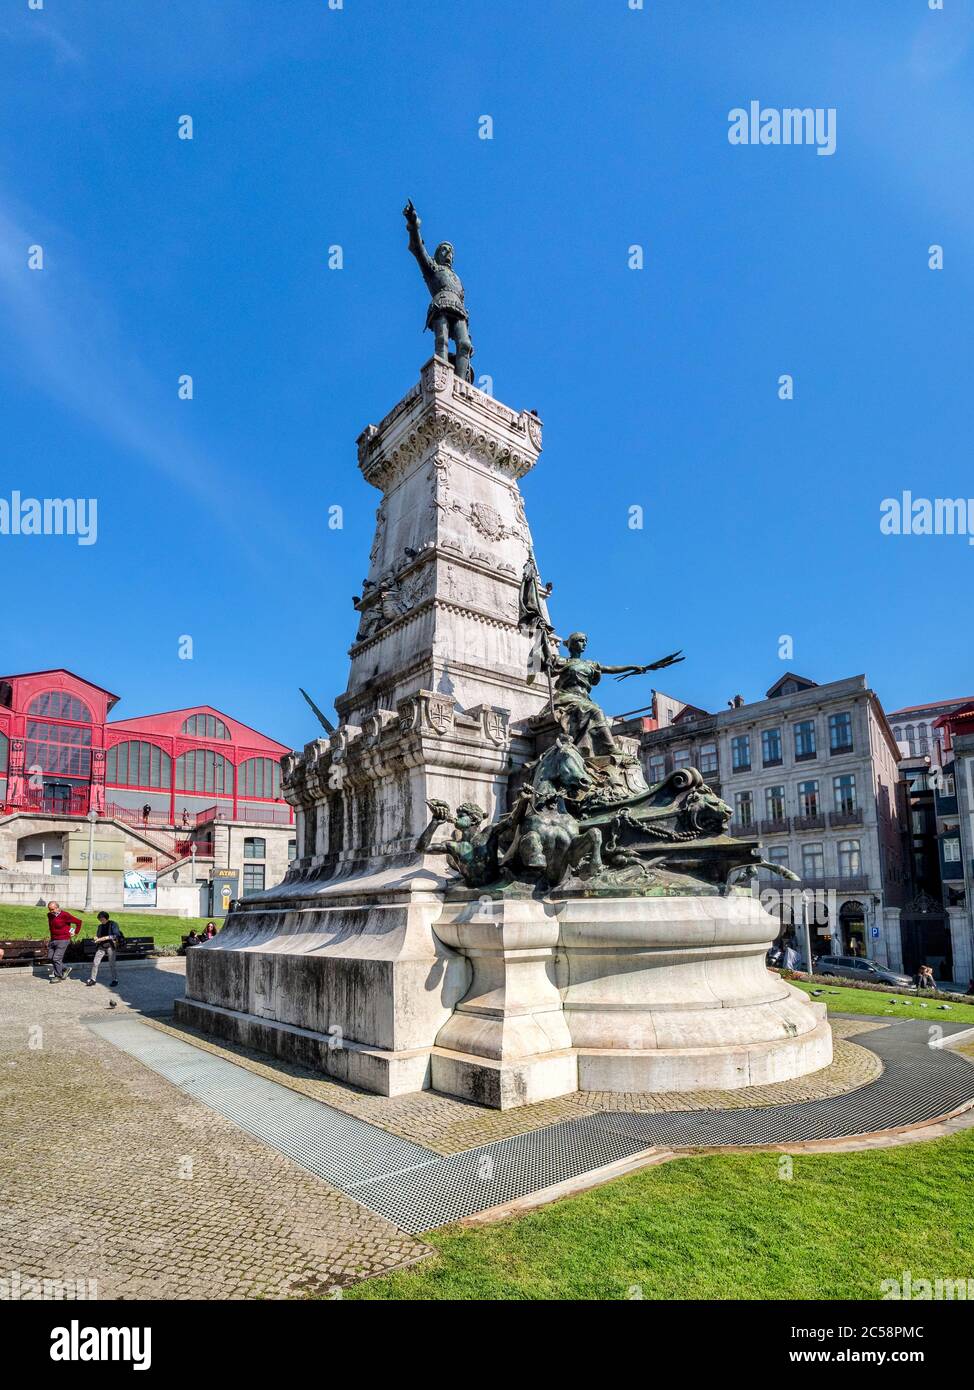 10 March 2020: Porto, Portugal - The statue of Infante Dom Henrique or Prince Henry the Navigator in the square and gardens named after him, in Porto. Stock Photo